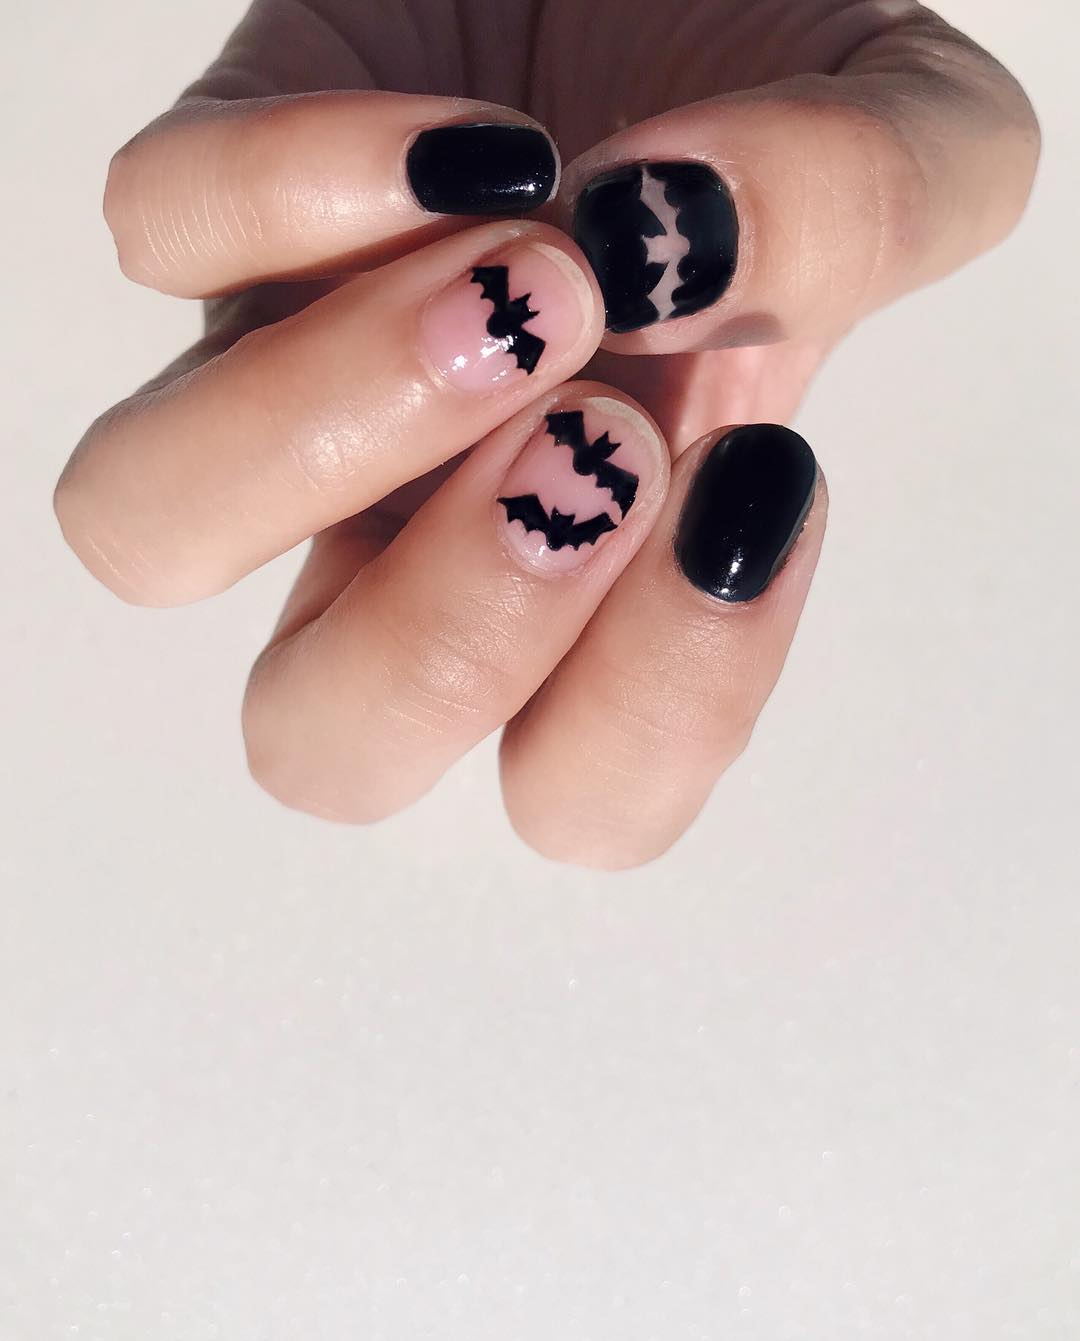 Cute Halloween Nails With Bat Designs